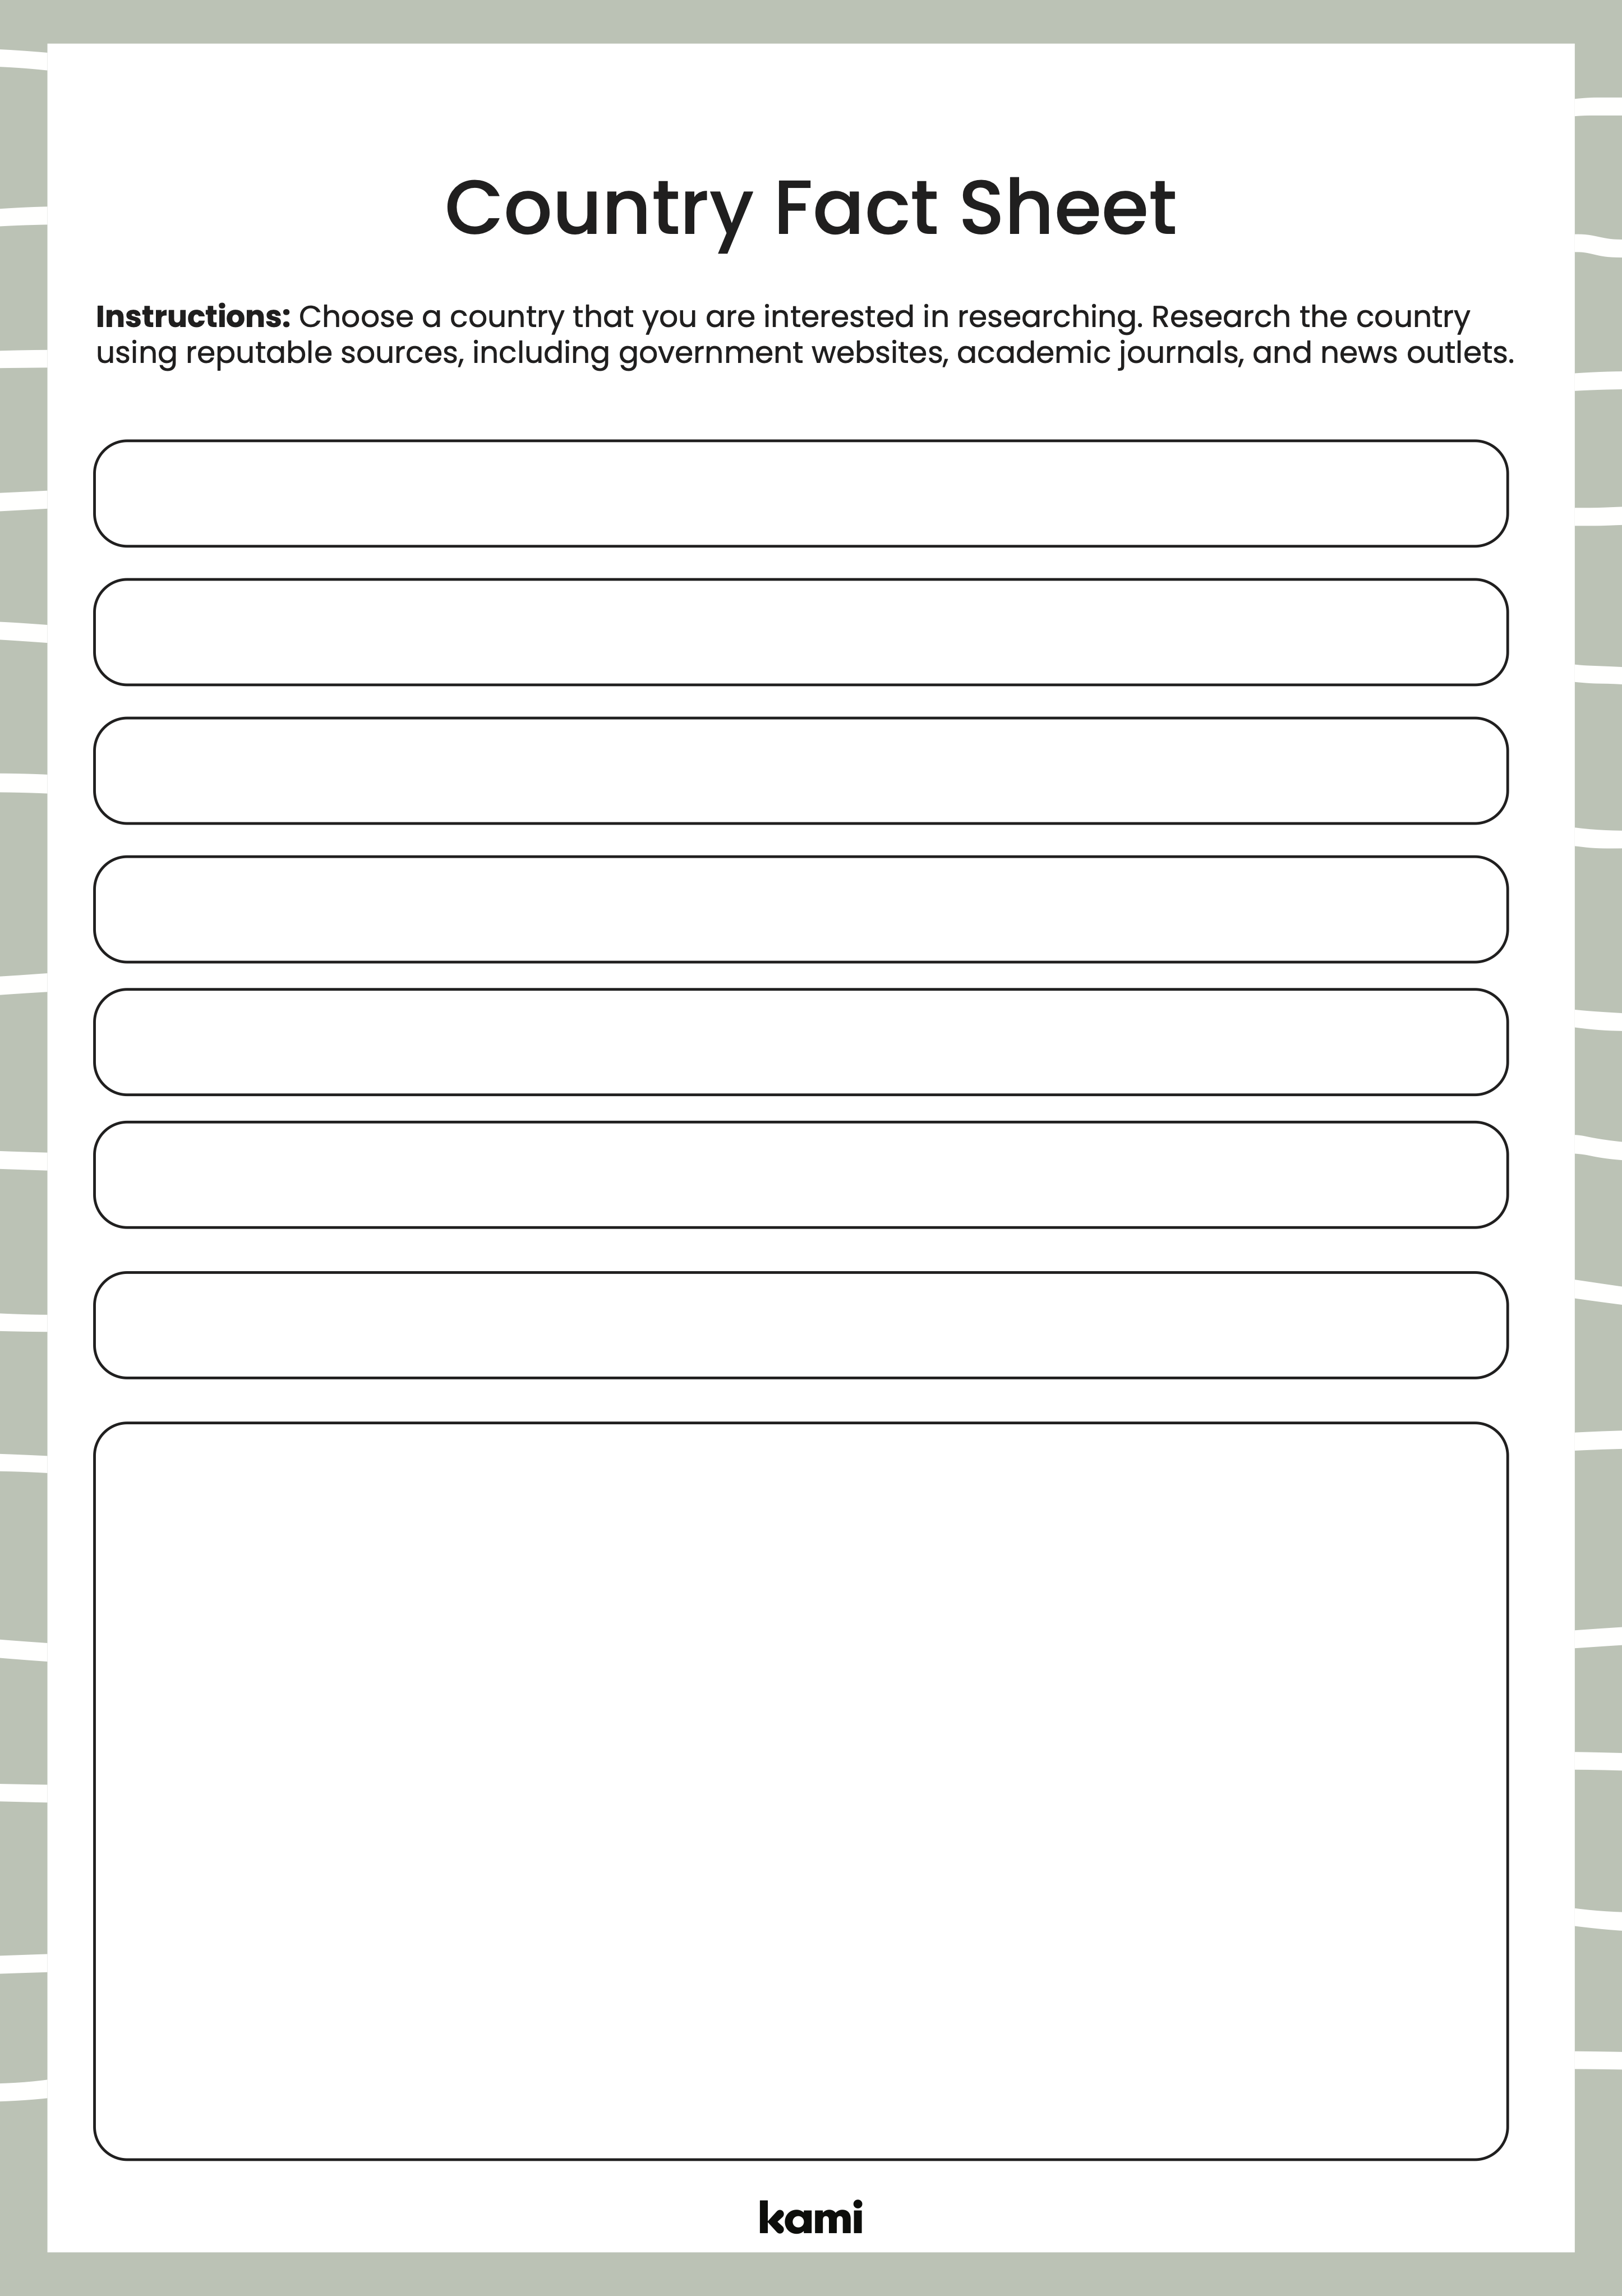 A country fact sheet for research projects with a blank design to create your own prompts.